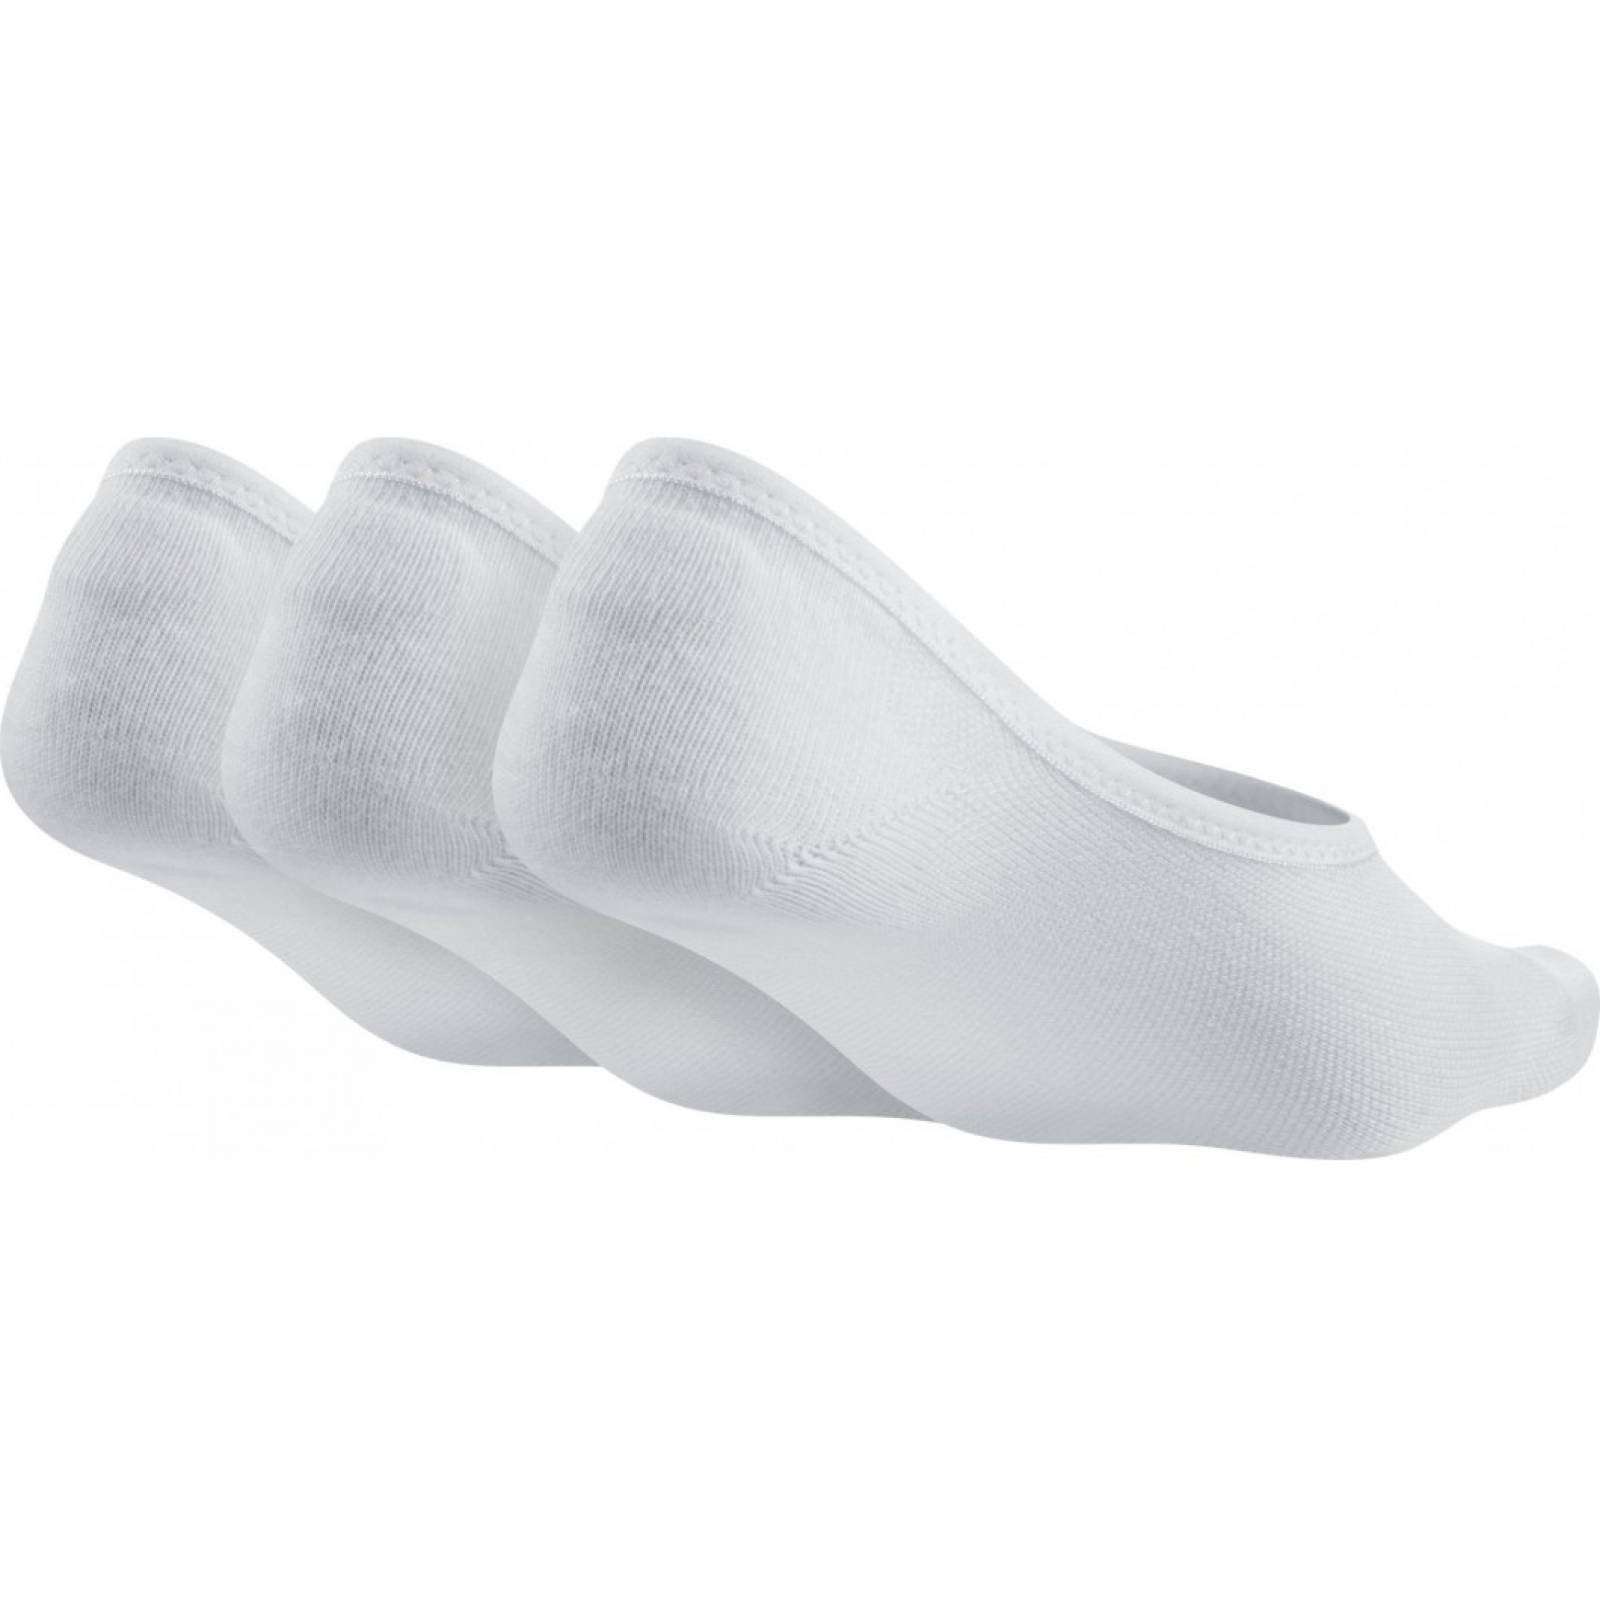 CALCETINES TRIC PACK LIGHTWEIGHT FOOTIE DAMA NIKE SX4863101 BLANCO